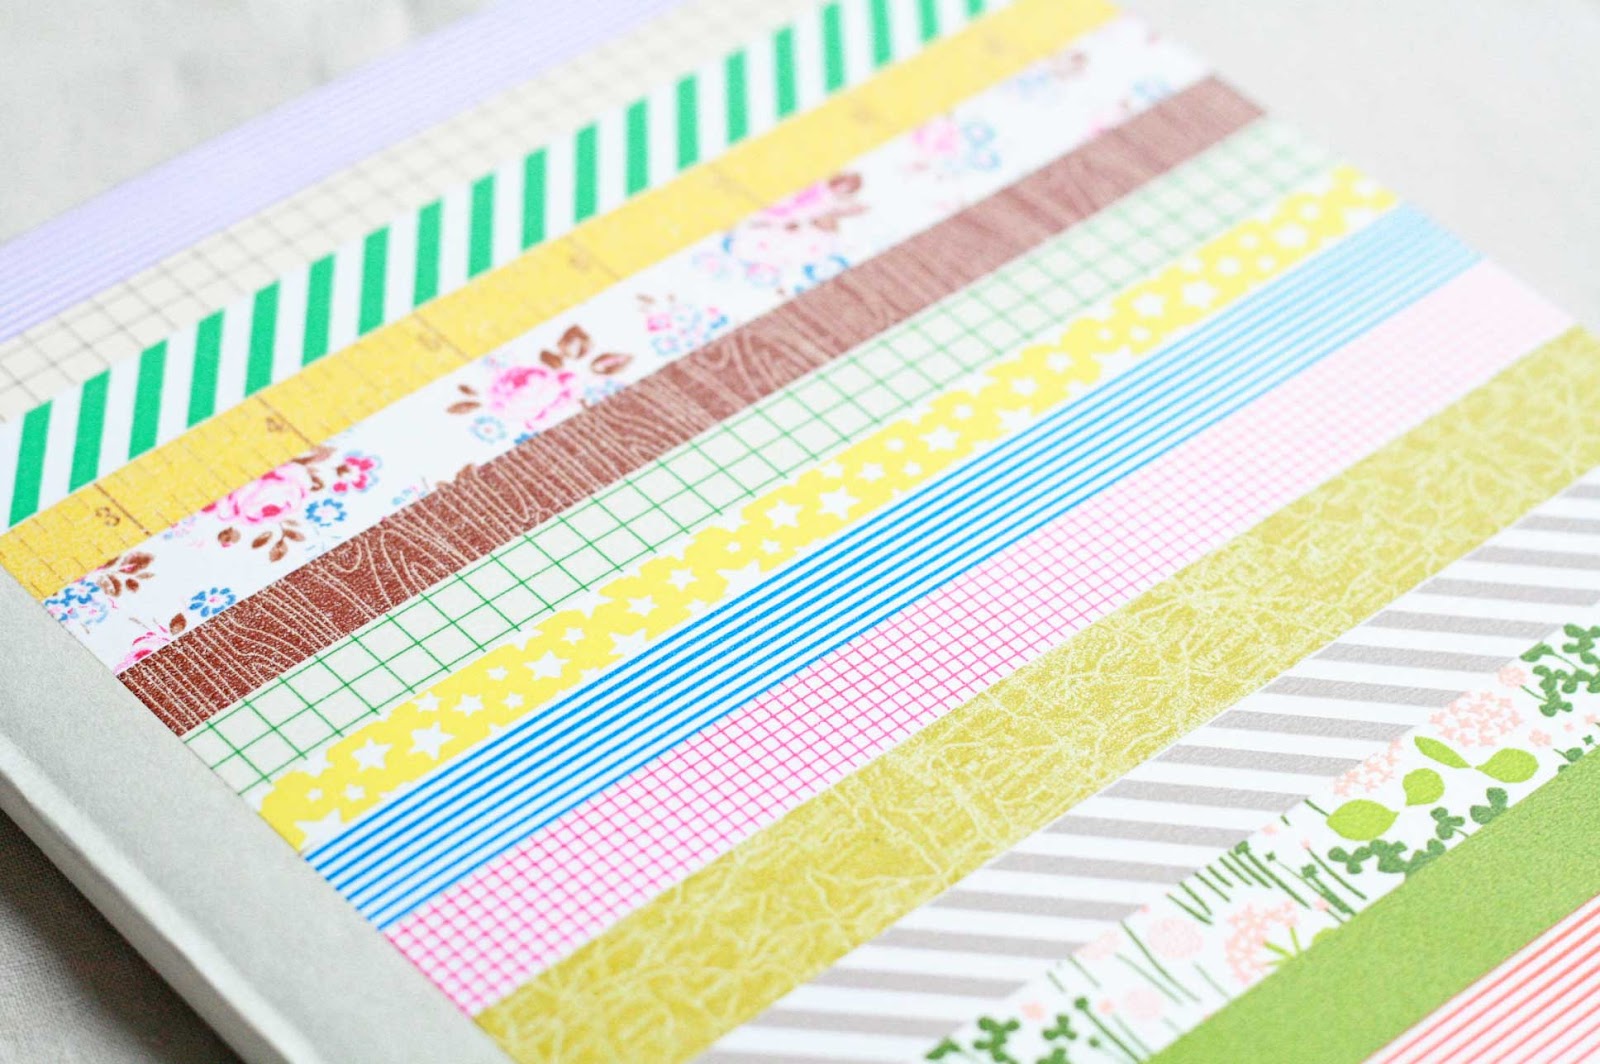 The Creative Place: DIY :: Lovely Washi Tape Notebook